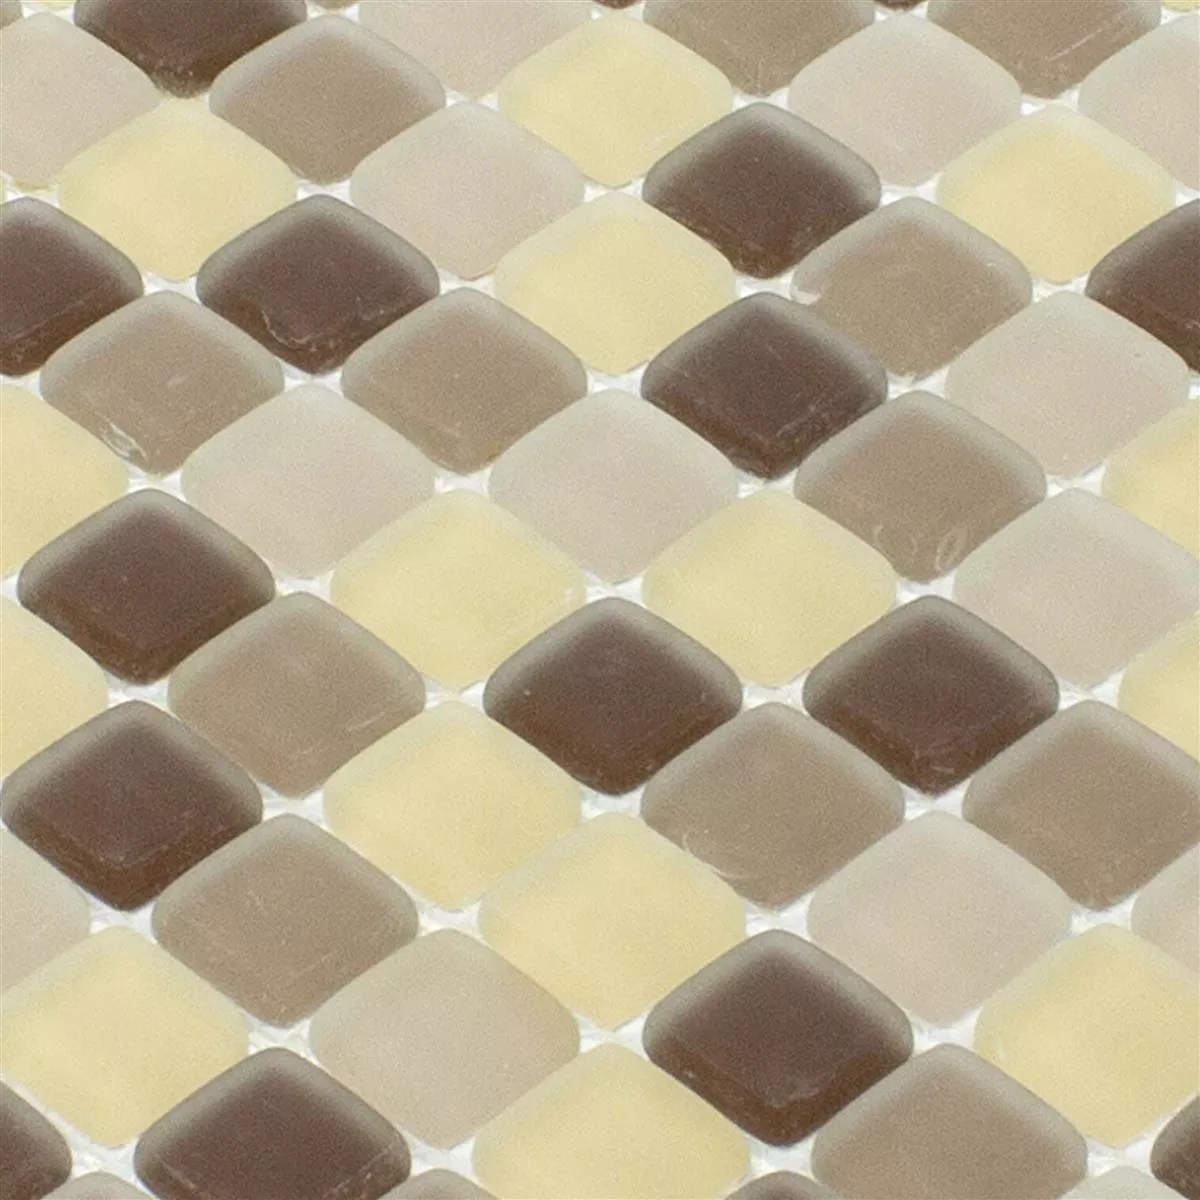 Sample Glass Mosaic Tiles Ponterio Frosted Brown Mix